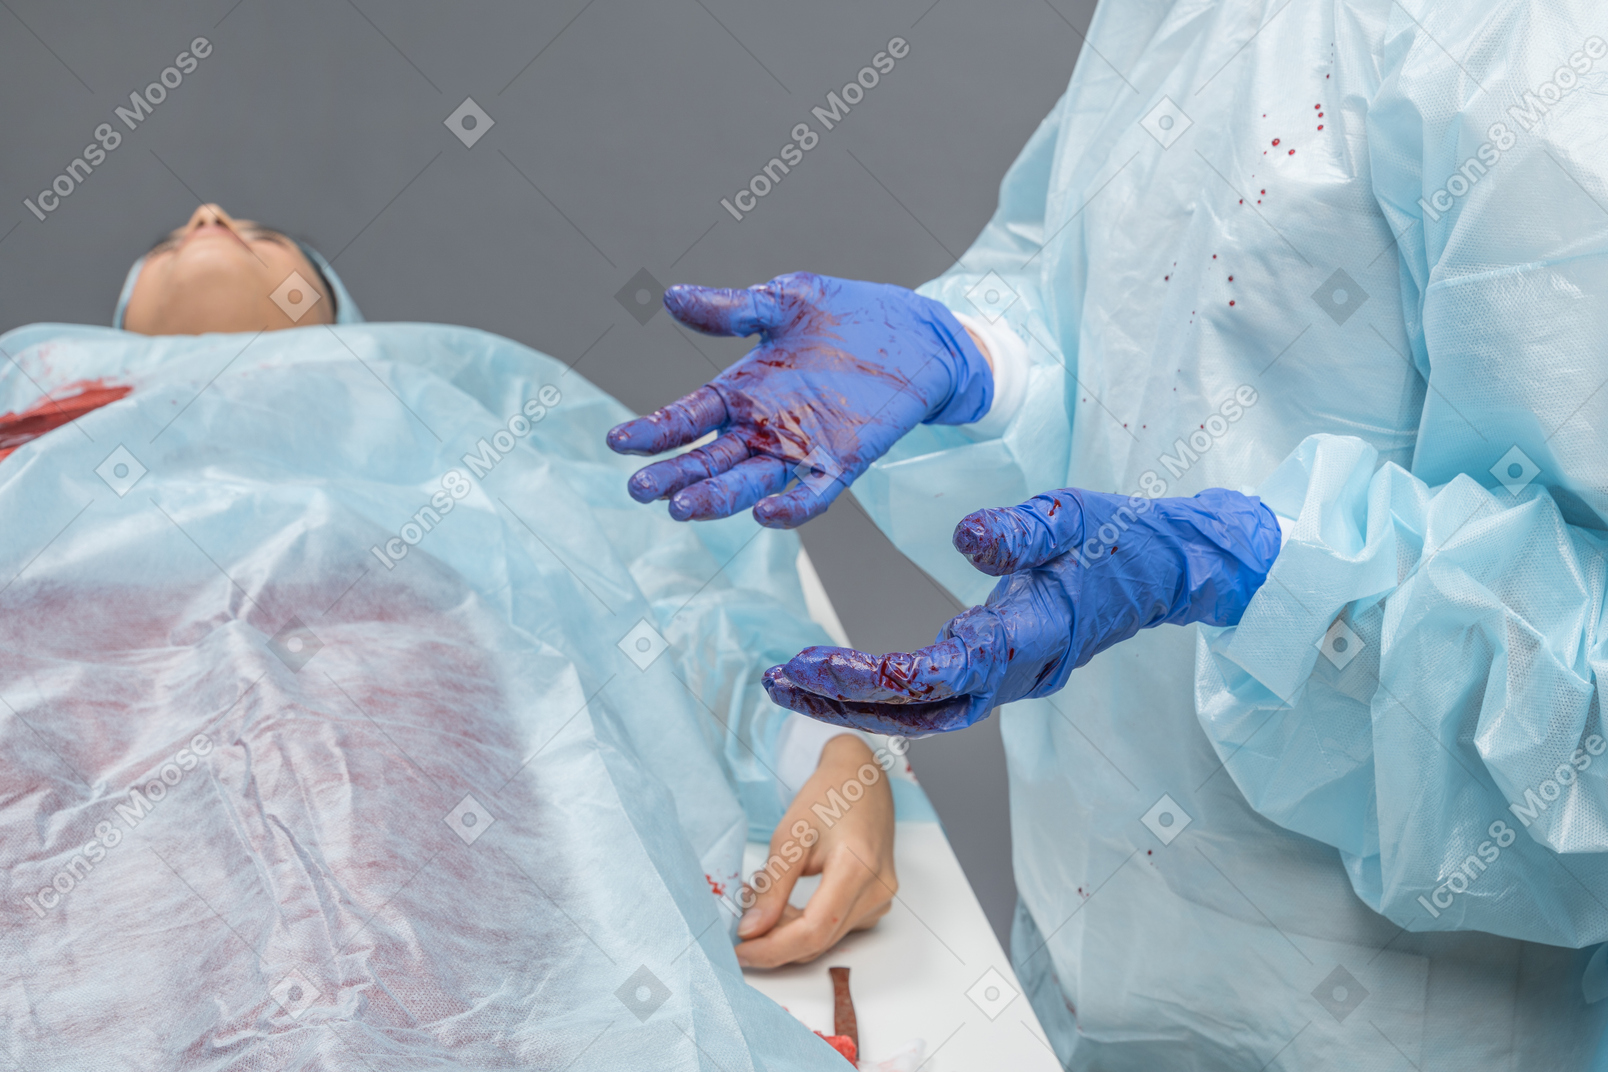 Doctor holding hands in front of her during operation